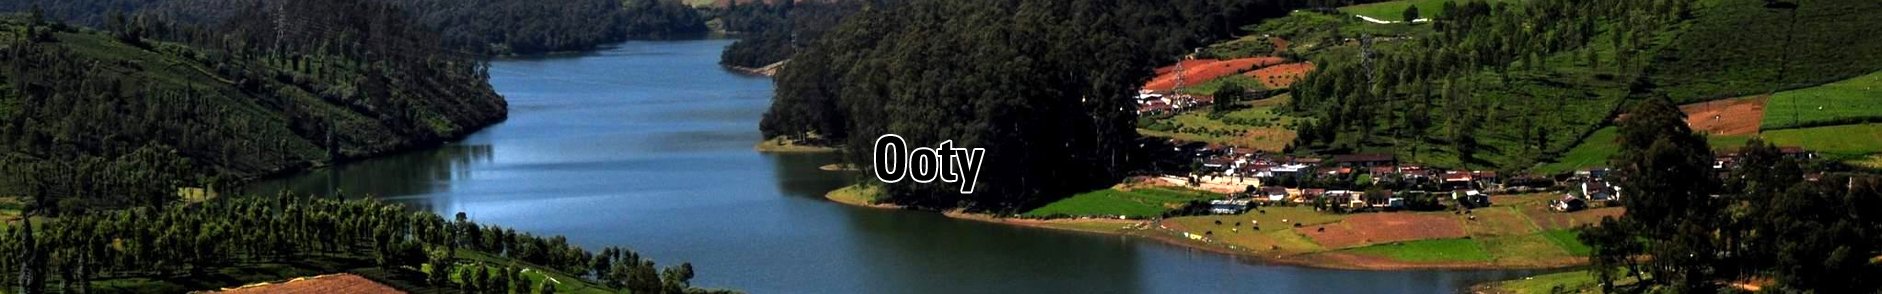 ooty Hill Station Holiday Packages